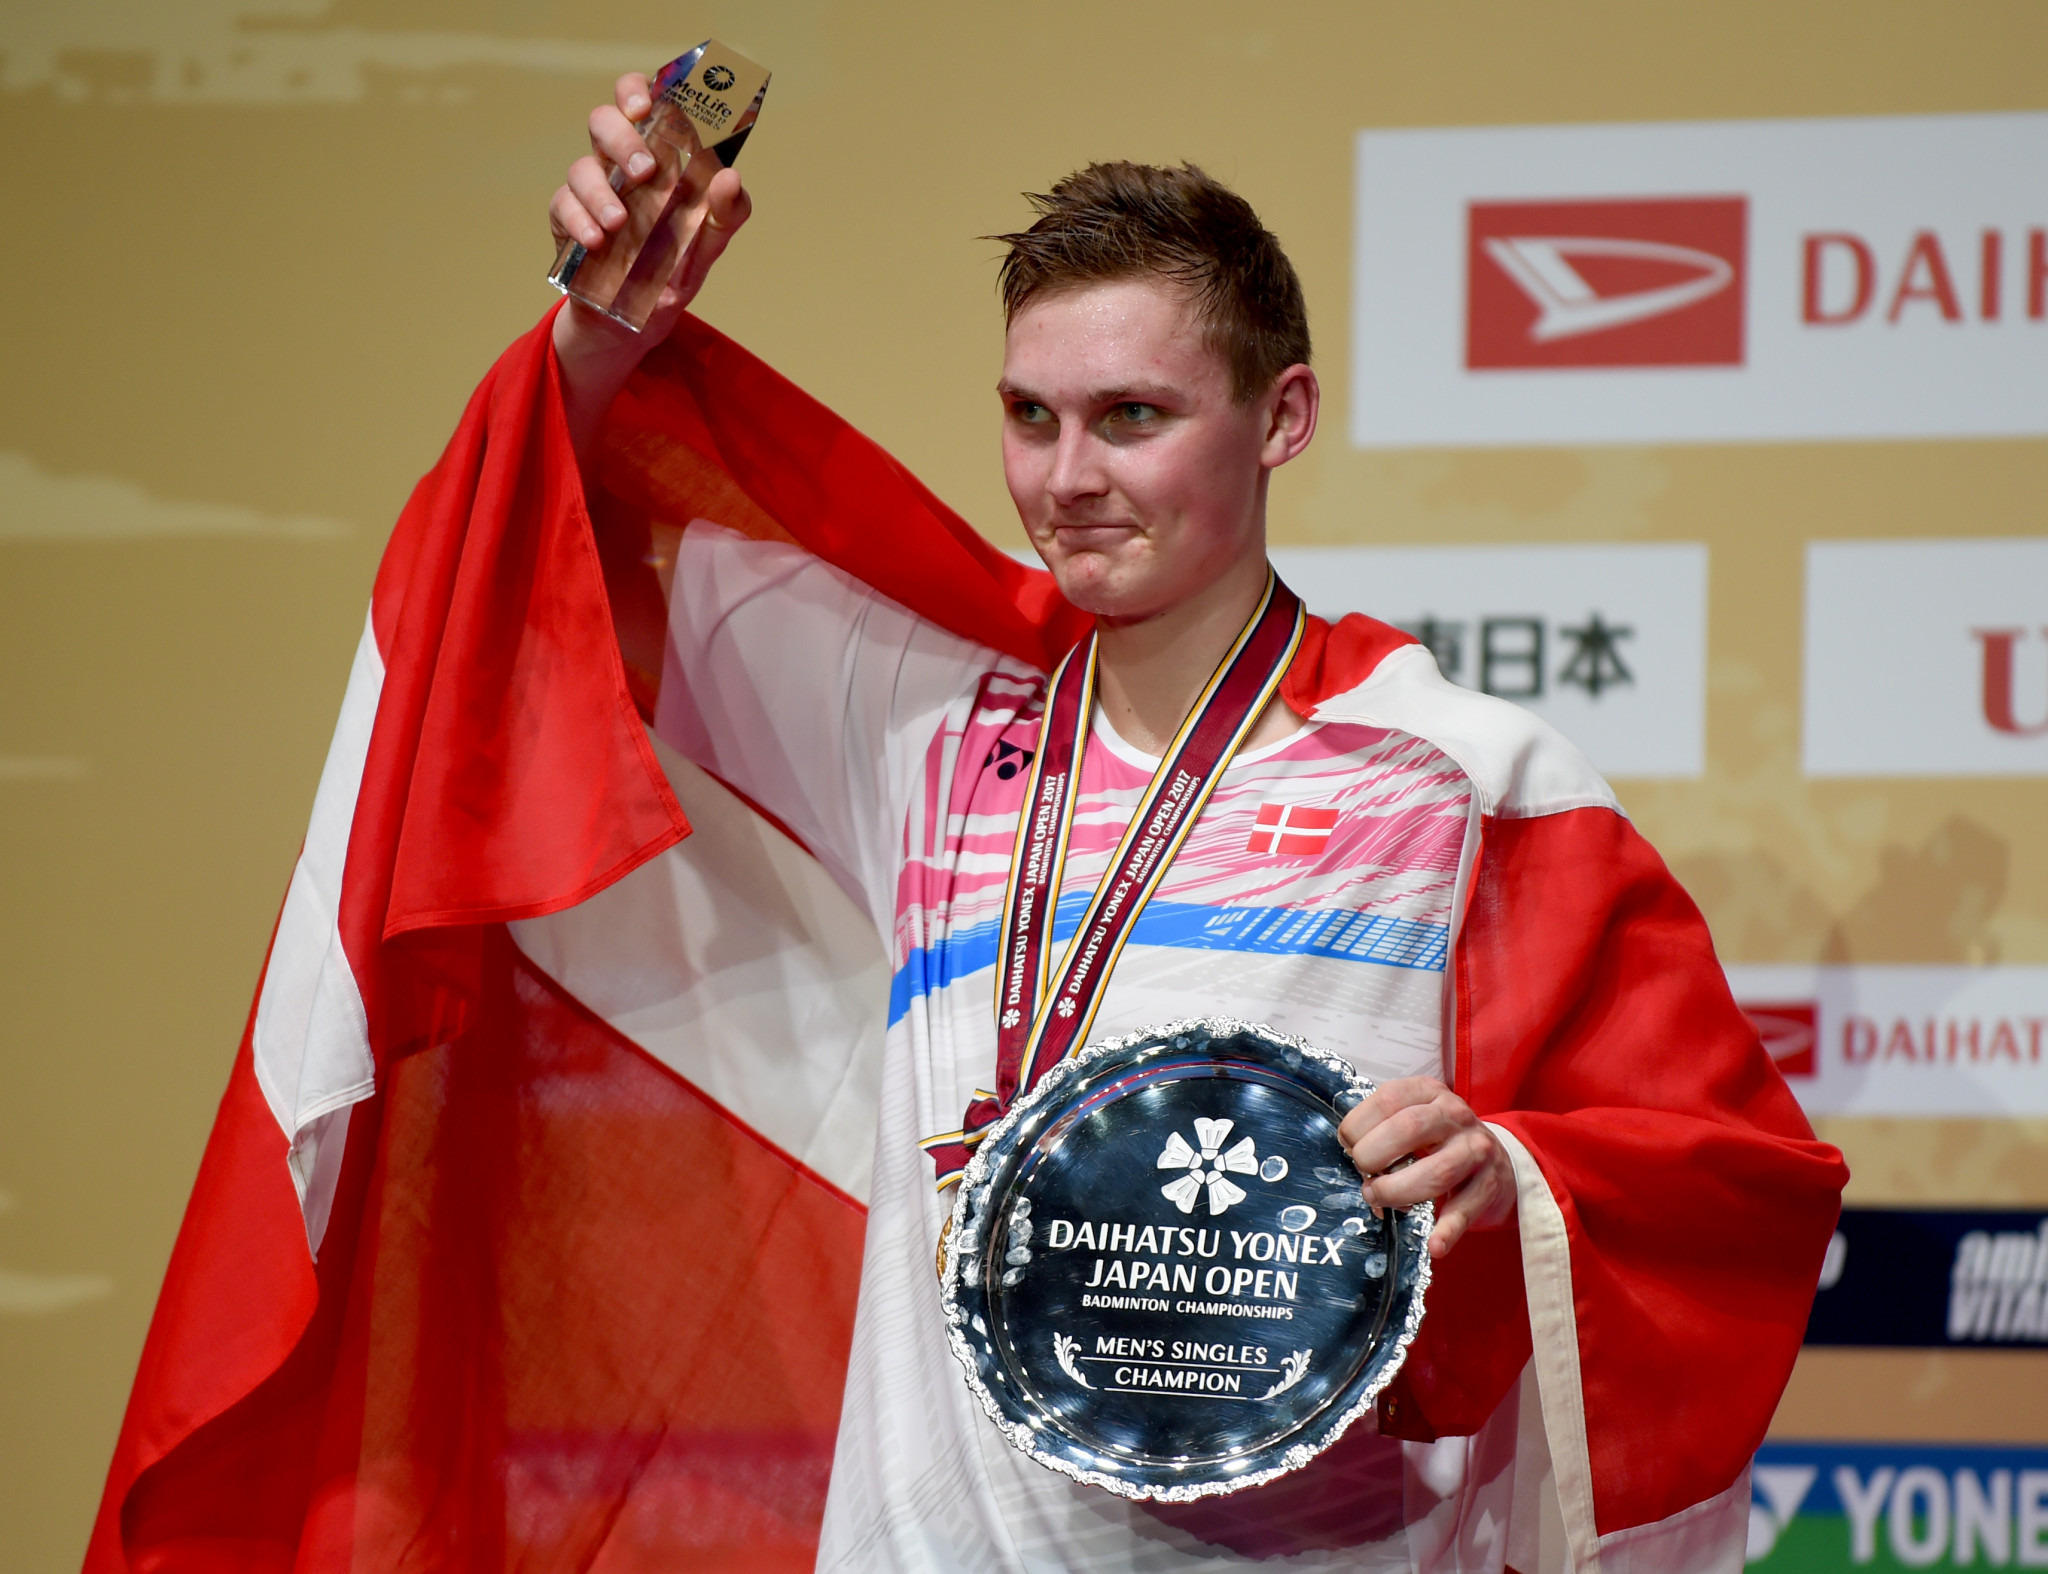 World champion Viktor Axelsen beat Malaysia’s Lee Chong Wei to the men’s singles title as action concluded today at the Badminton World Federation Japan Open ©Getty Images